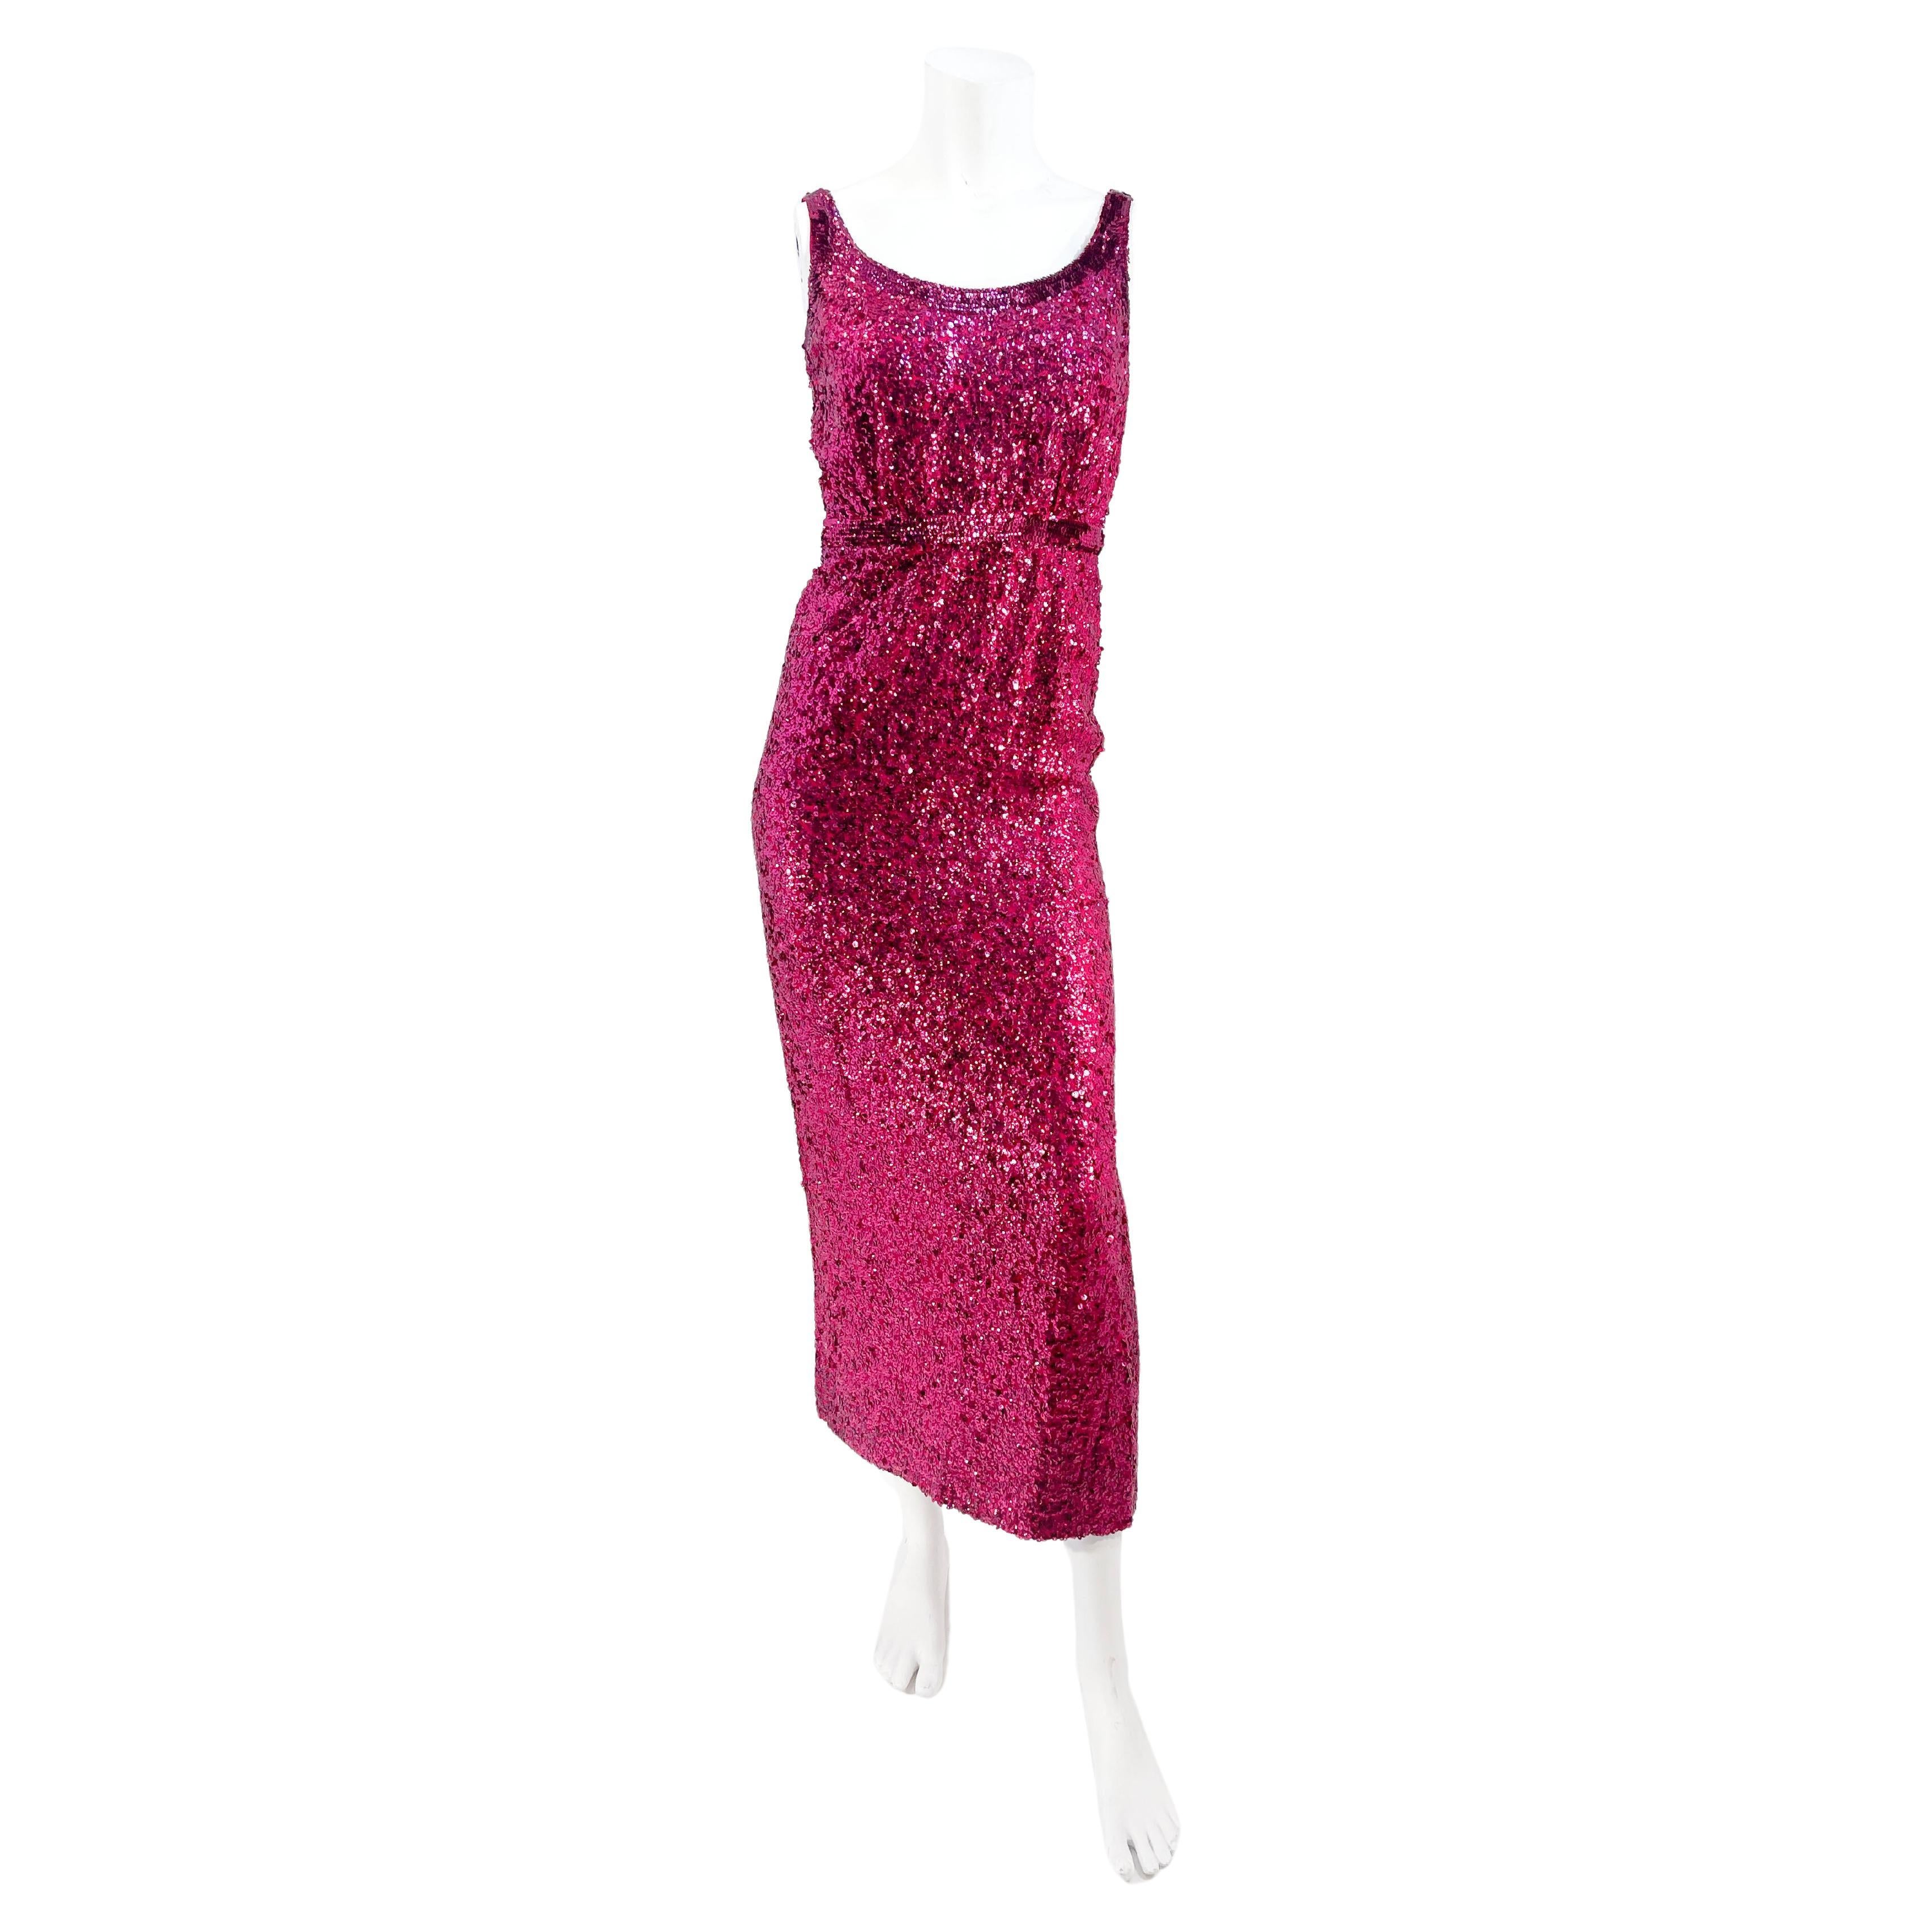 Neiman Marcus Evening Dresses and Gowns